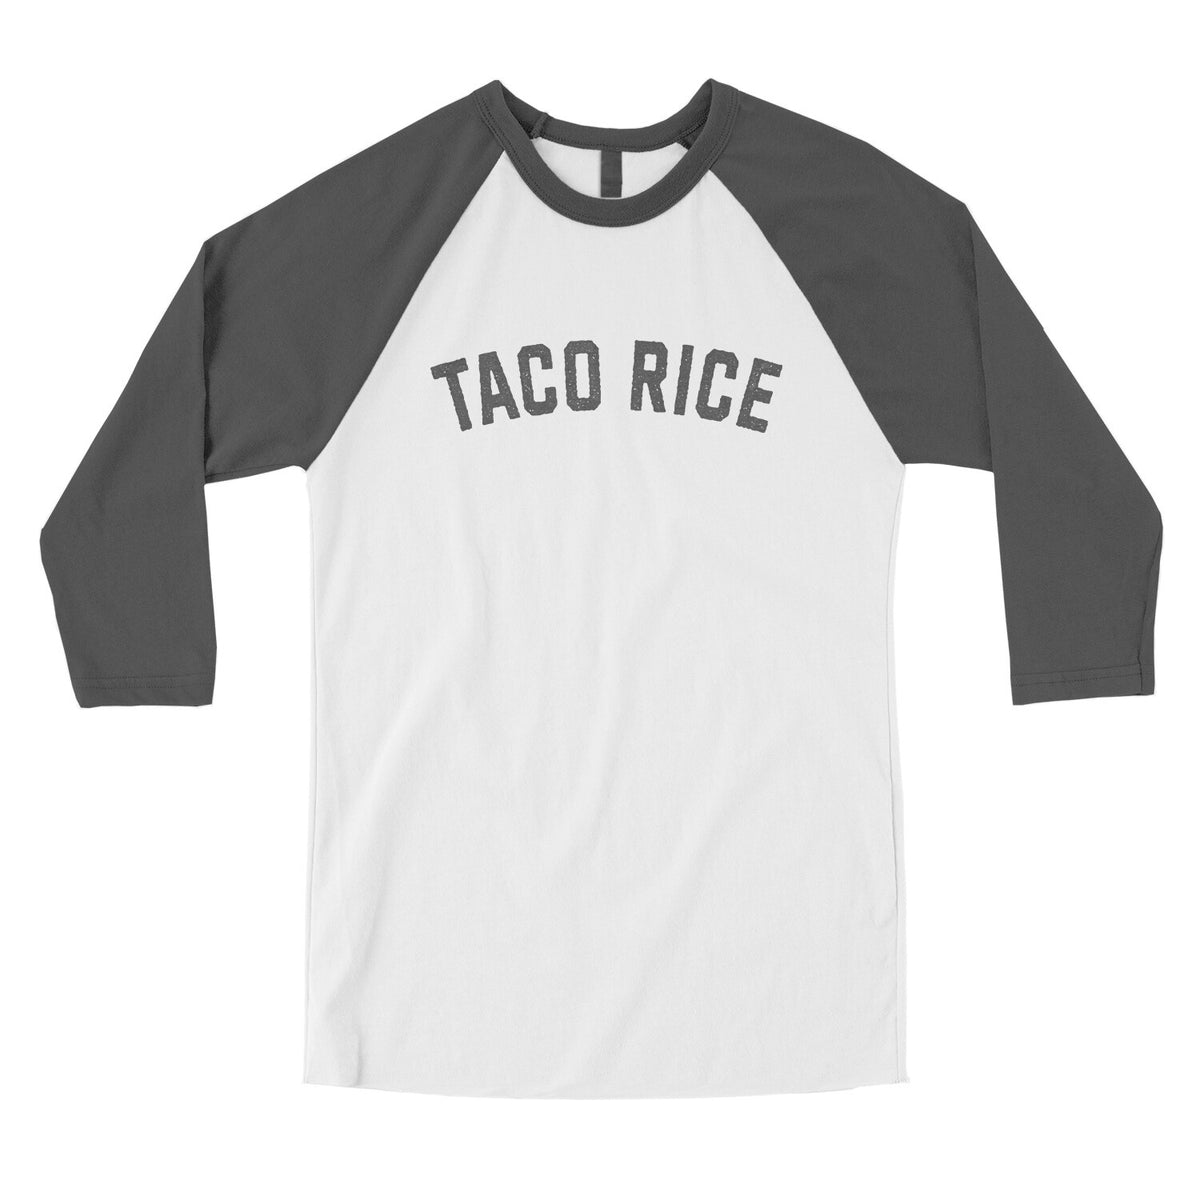 Taco Rice in White with Asphalt Color